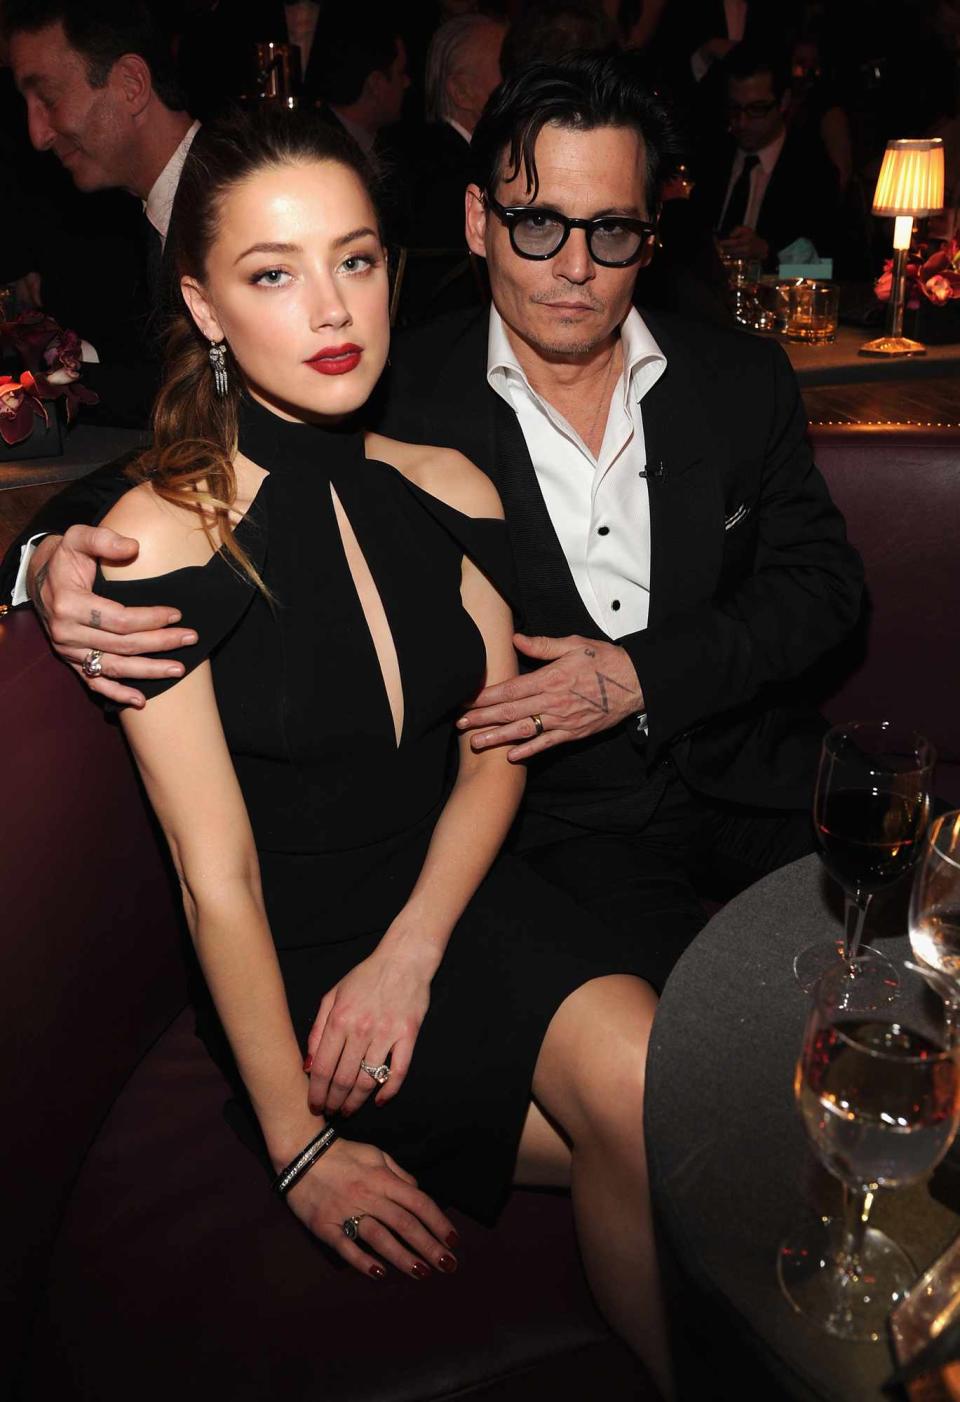 Amber Heard and Johnny Depp attend Spike TV's "Don Rickles: One Night Only" in New York City